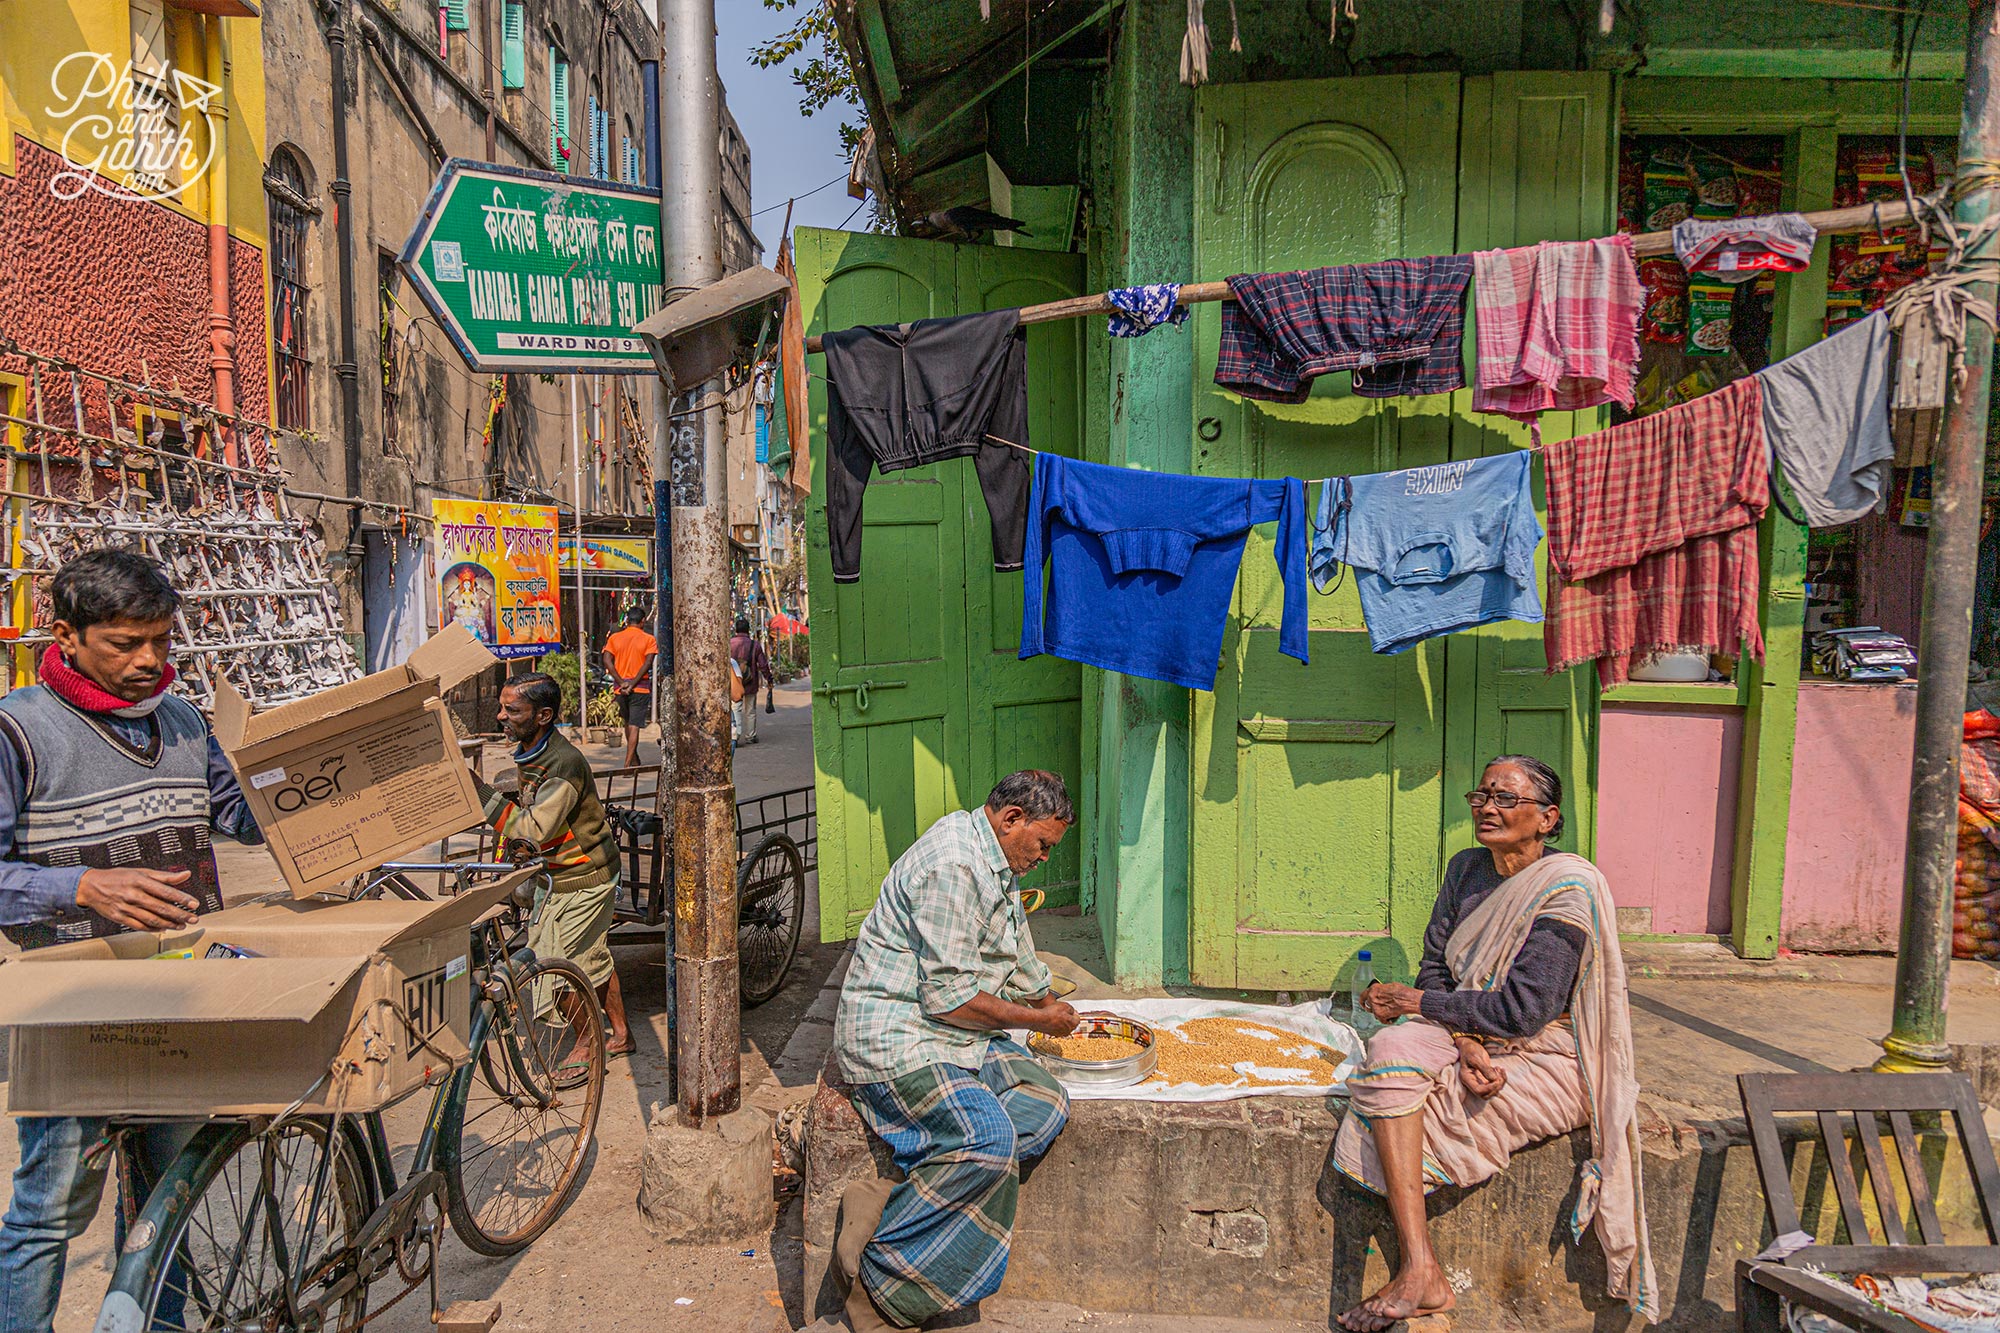 The streets in the Kumartuli neighbourhood are a glimpse into daily life in Kolkata